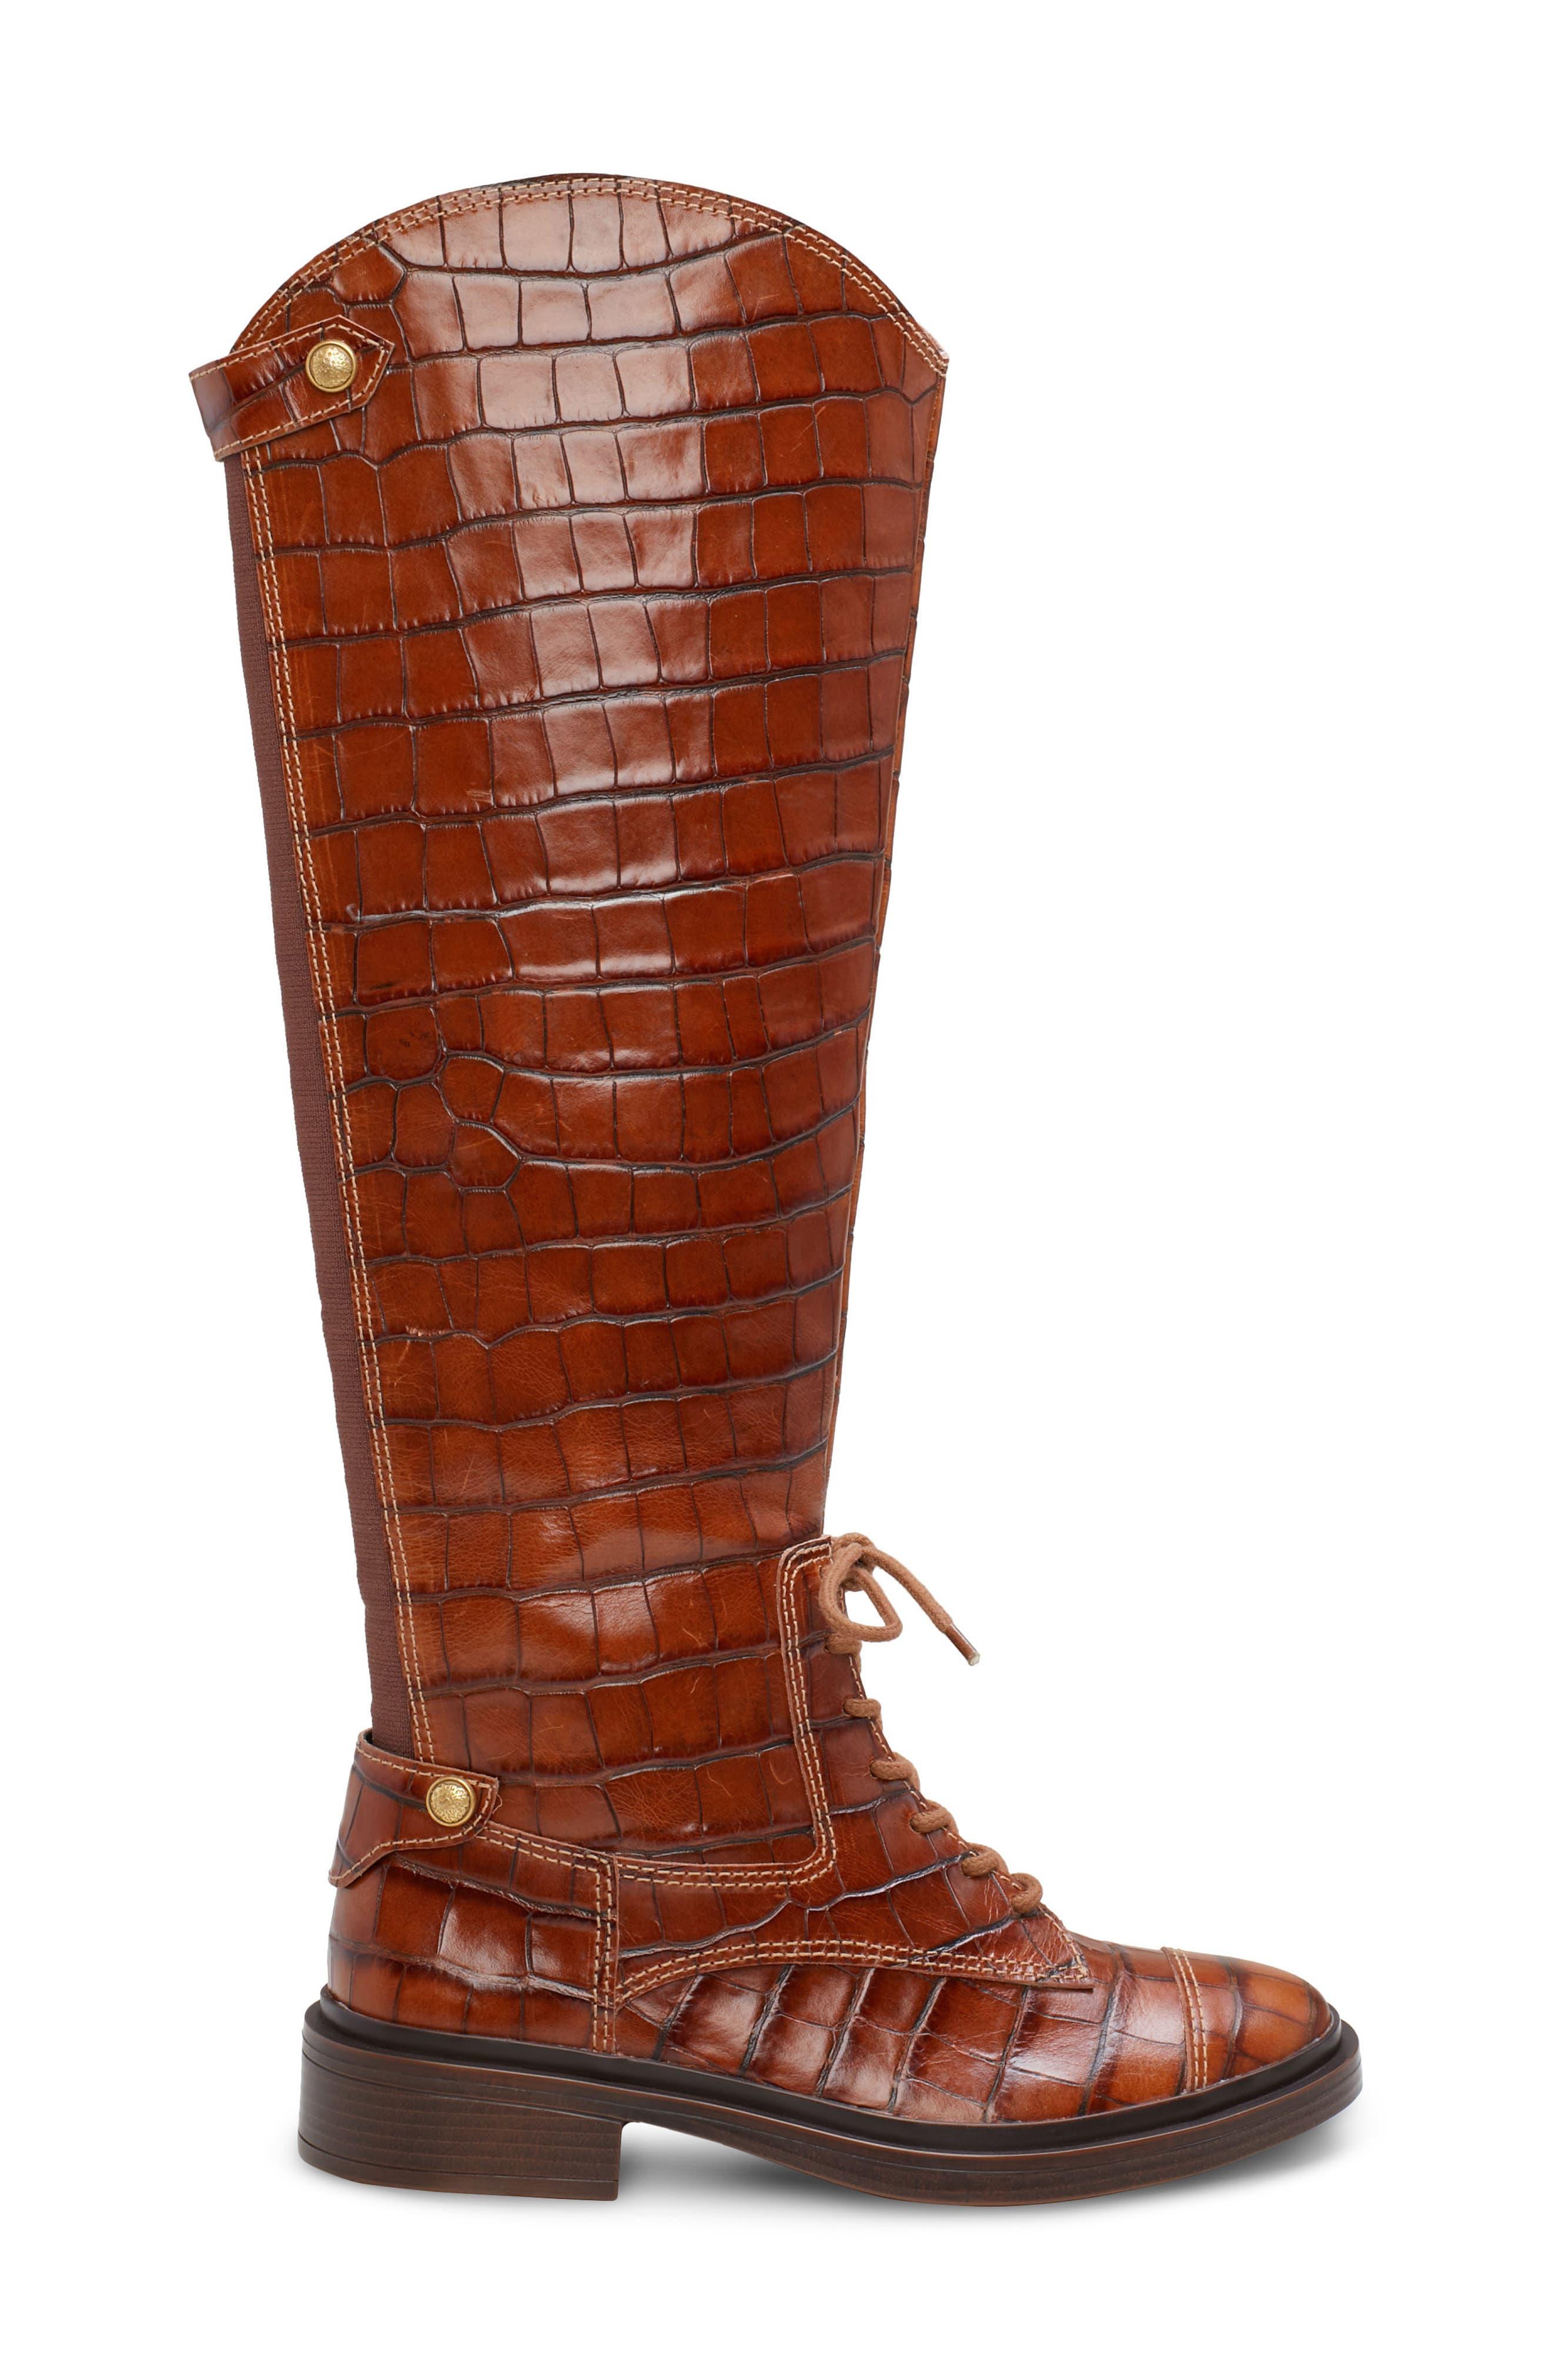 Vince Camuto Tressara Pointed Toe Knee High Leather Boots